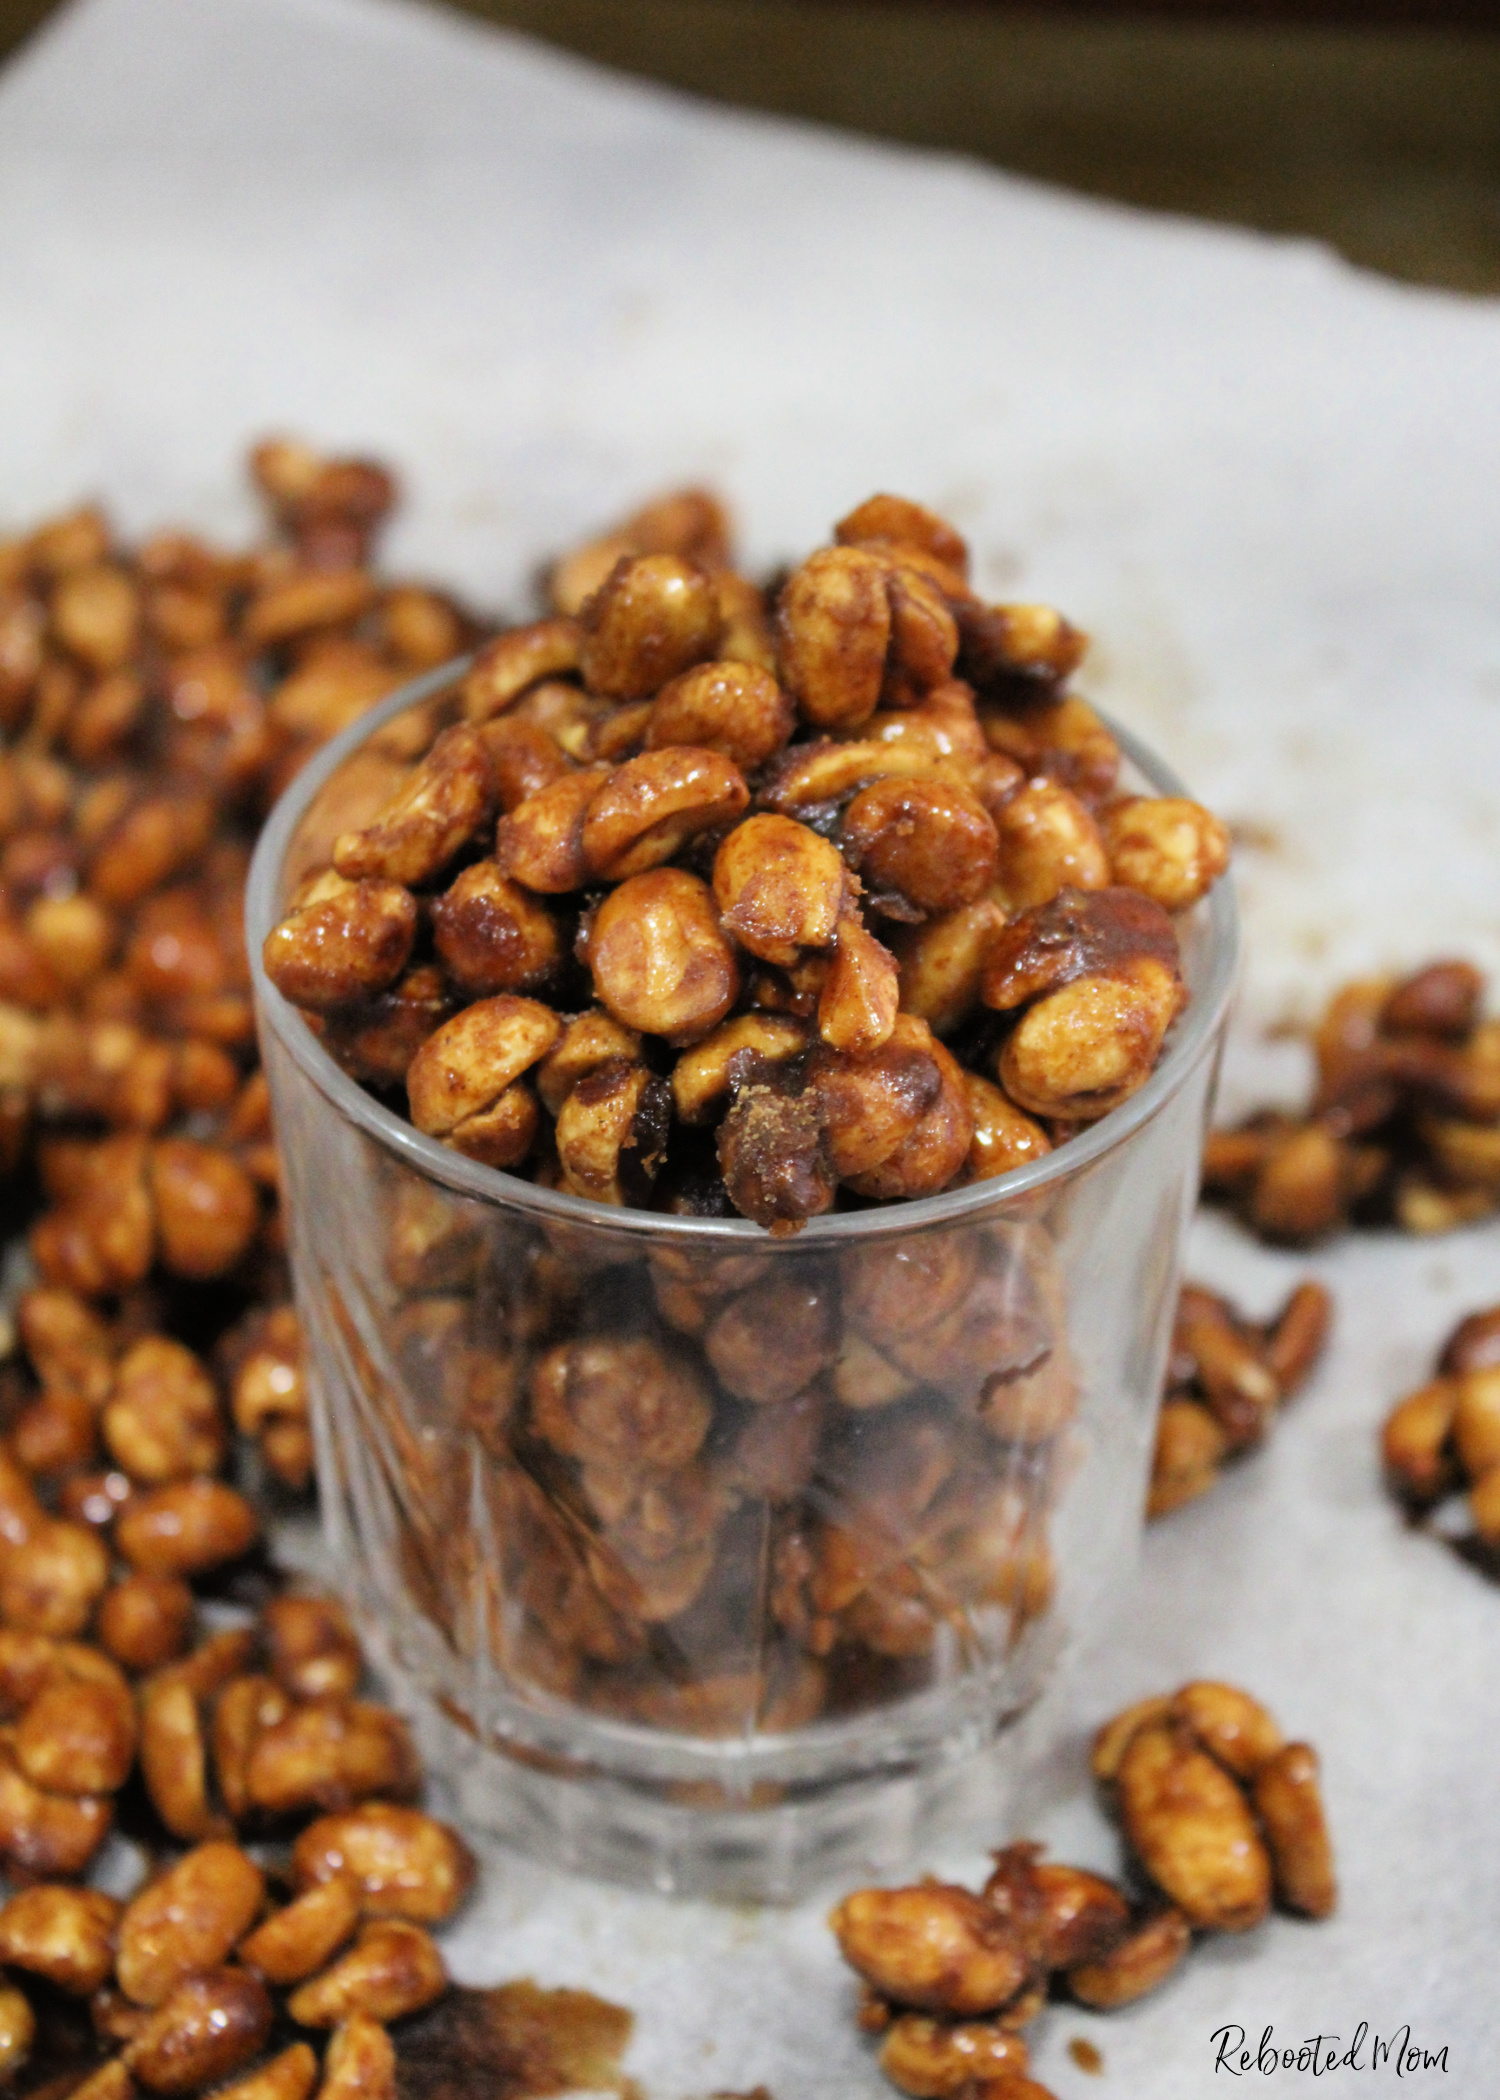 Bourbon Candied Peanuts are addictive, delicious and super easy to throw together - they make the perfect sweet snack and an even better gift for the holidays!  